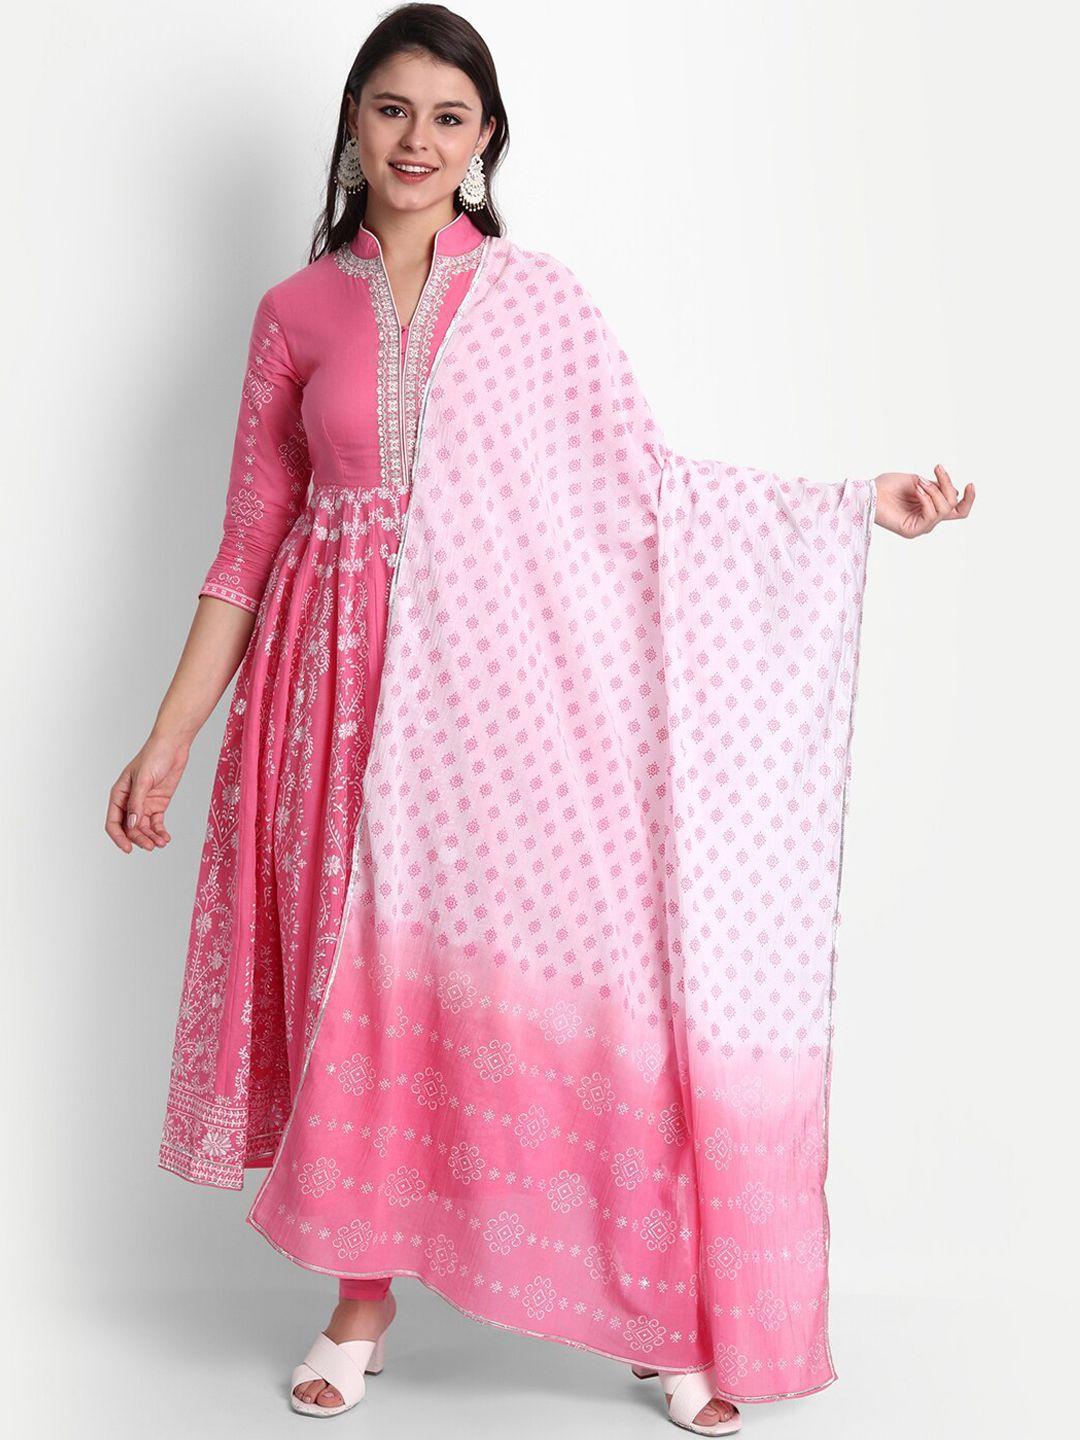 shereen women pink ethnic motifs embroidered empire pure cotton kurti with churidar & with dupatta